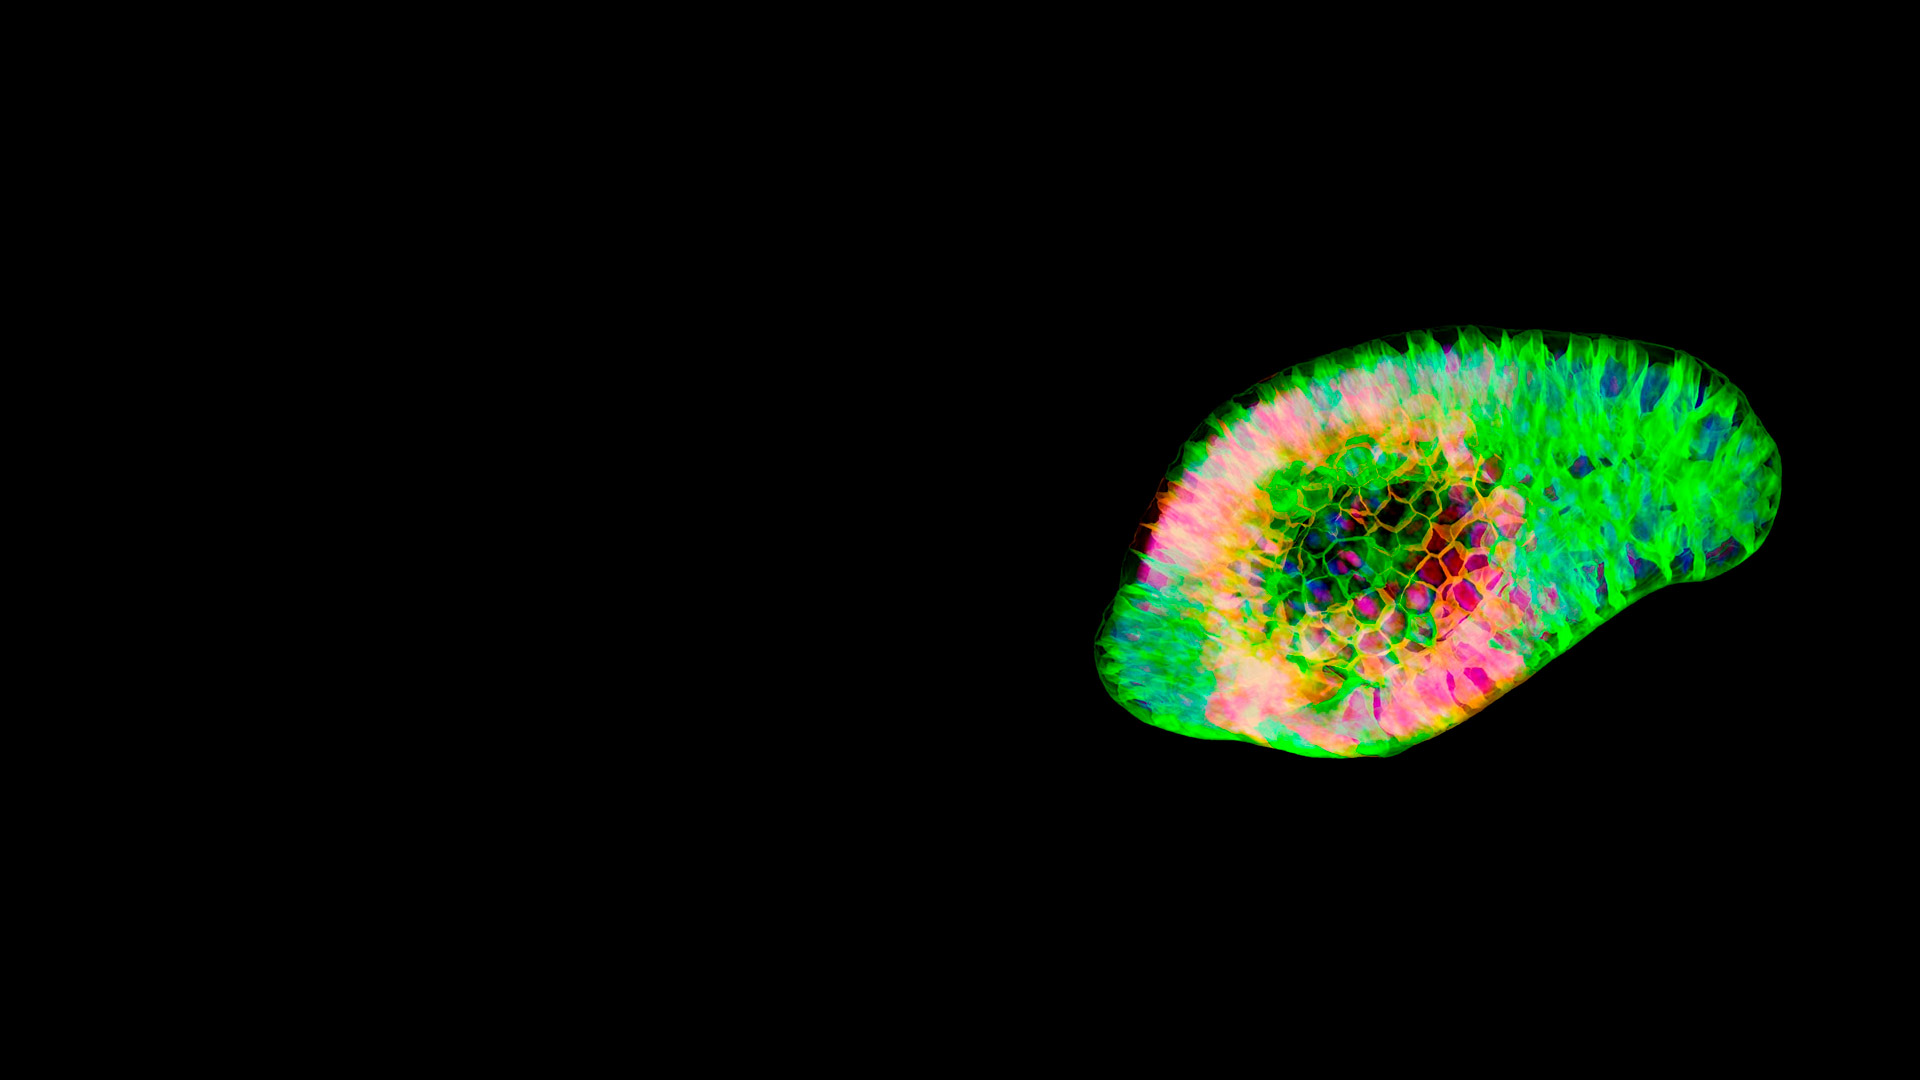 From Image to Results | Organoid Analysis